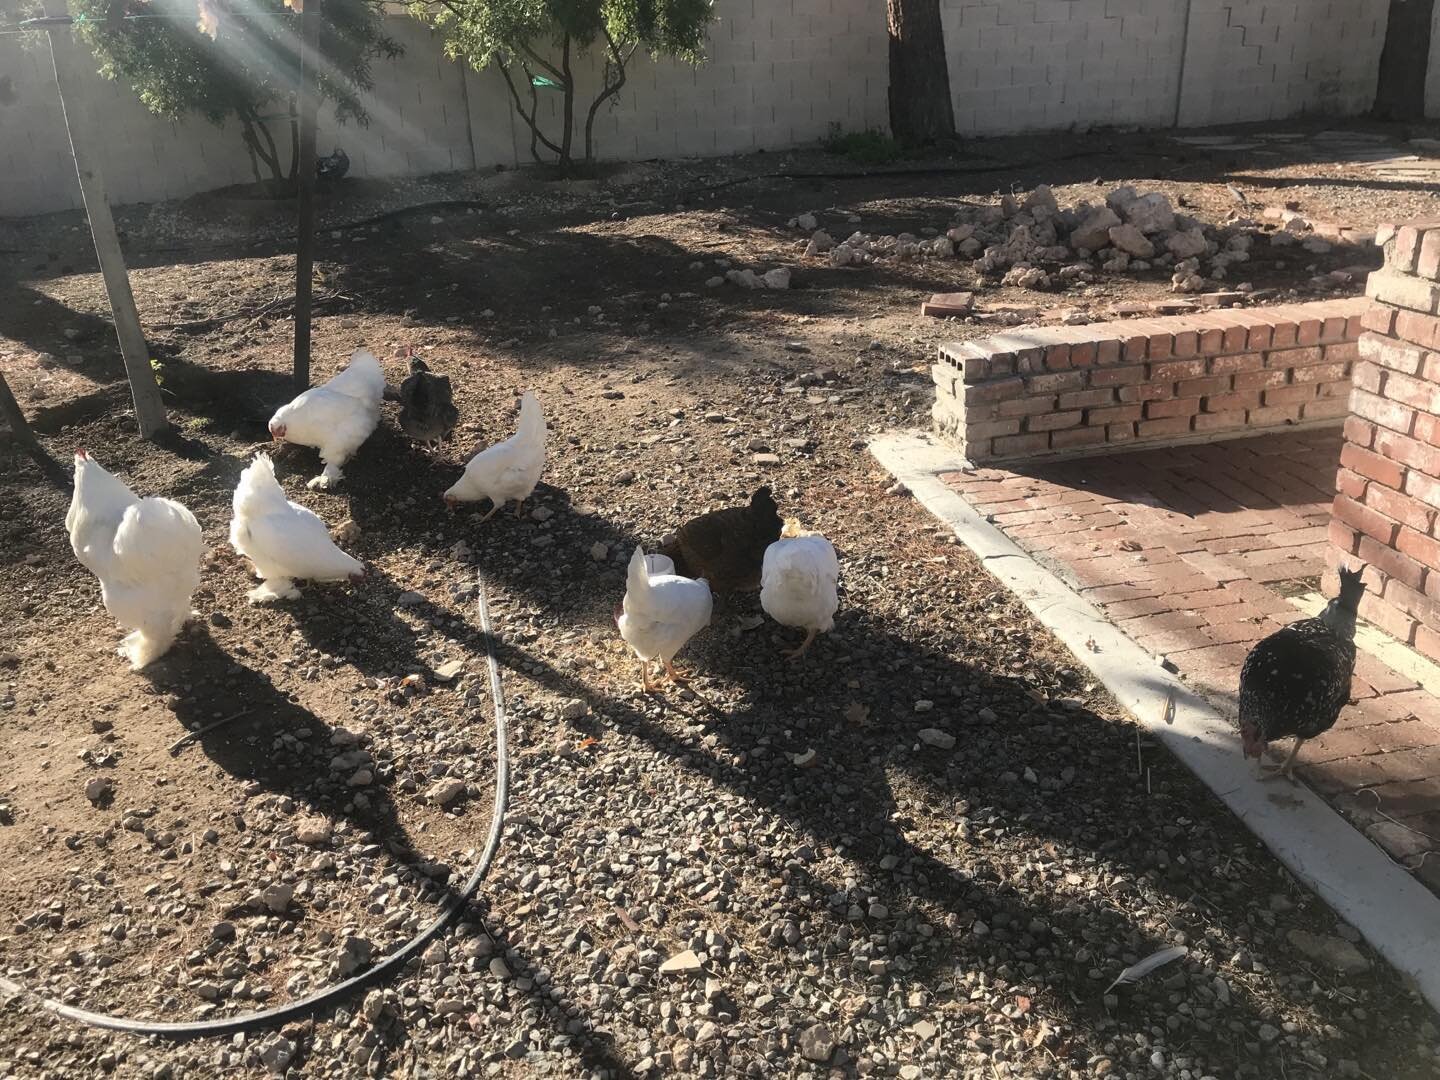 We brought all our ladies from Redondo to Las Vegas to share Christmas time with them. They were happy to, again, see, their brother Gudetama the rooster (big white fluffy ball) 🐓😀.